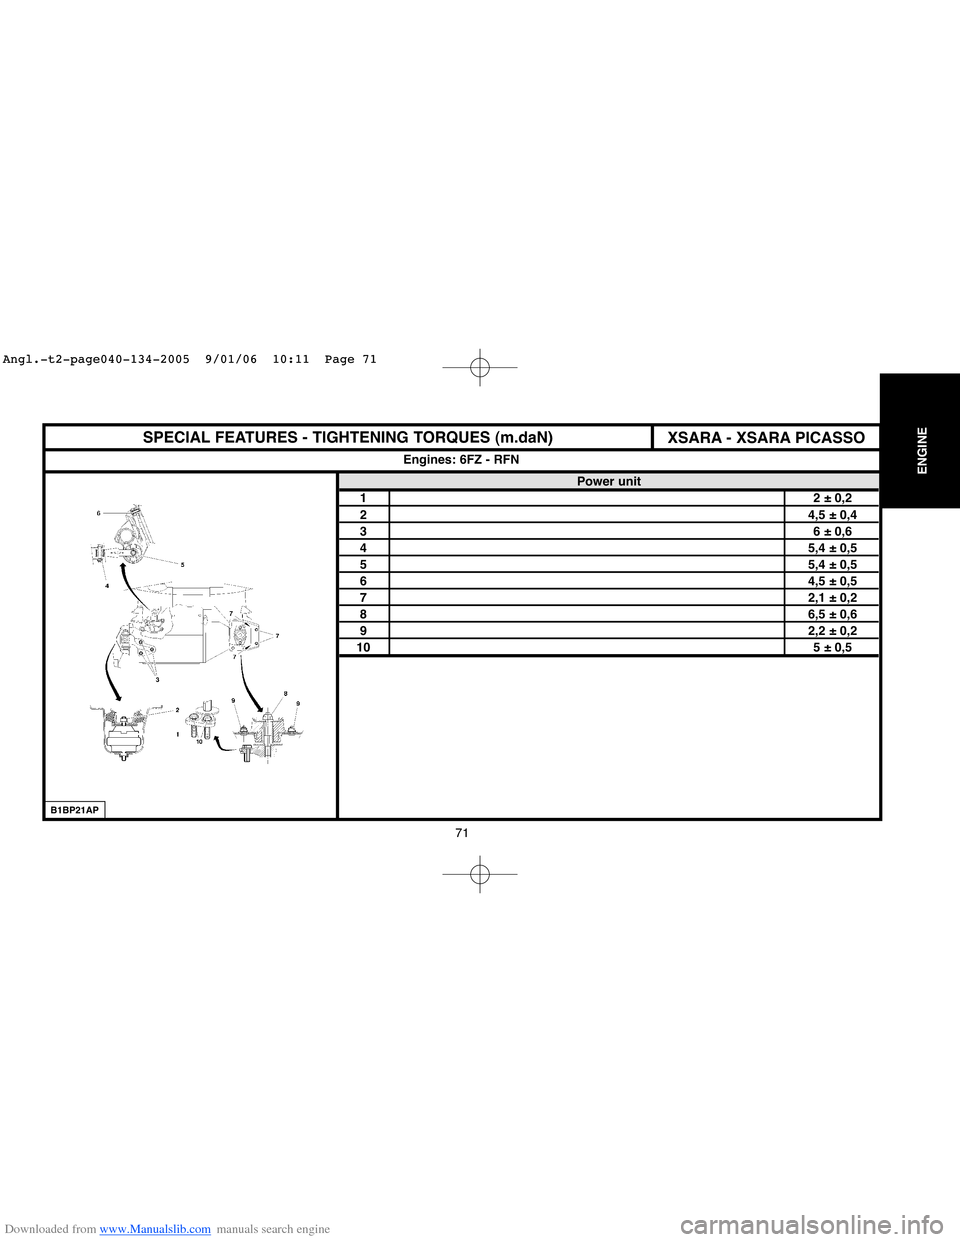 Citroen C4 2005 2.G Workshop Manual Downloaded from www.Manualslib.com manuals search engine 71
ENGINE
SPECIAL FEATURES - TIGHTENING TORQUES (m.daN)
Power unit
12 ± 0,2
24,5 ± 0,4
36 ± 0,6
45,4 ± 0,5
55,4 ± 0,5
64,5 ± 0,5
72,1 ± 